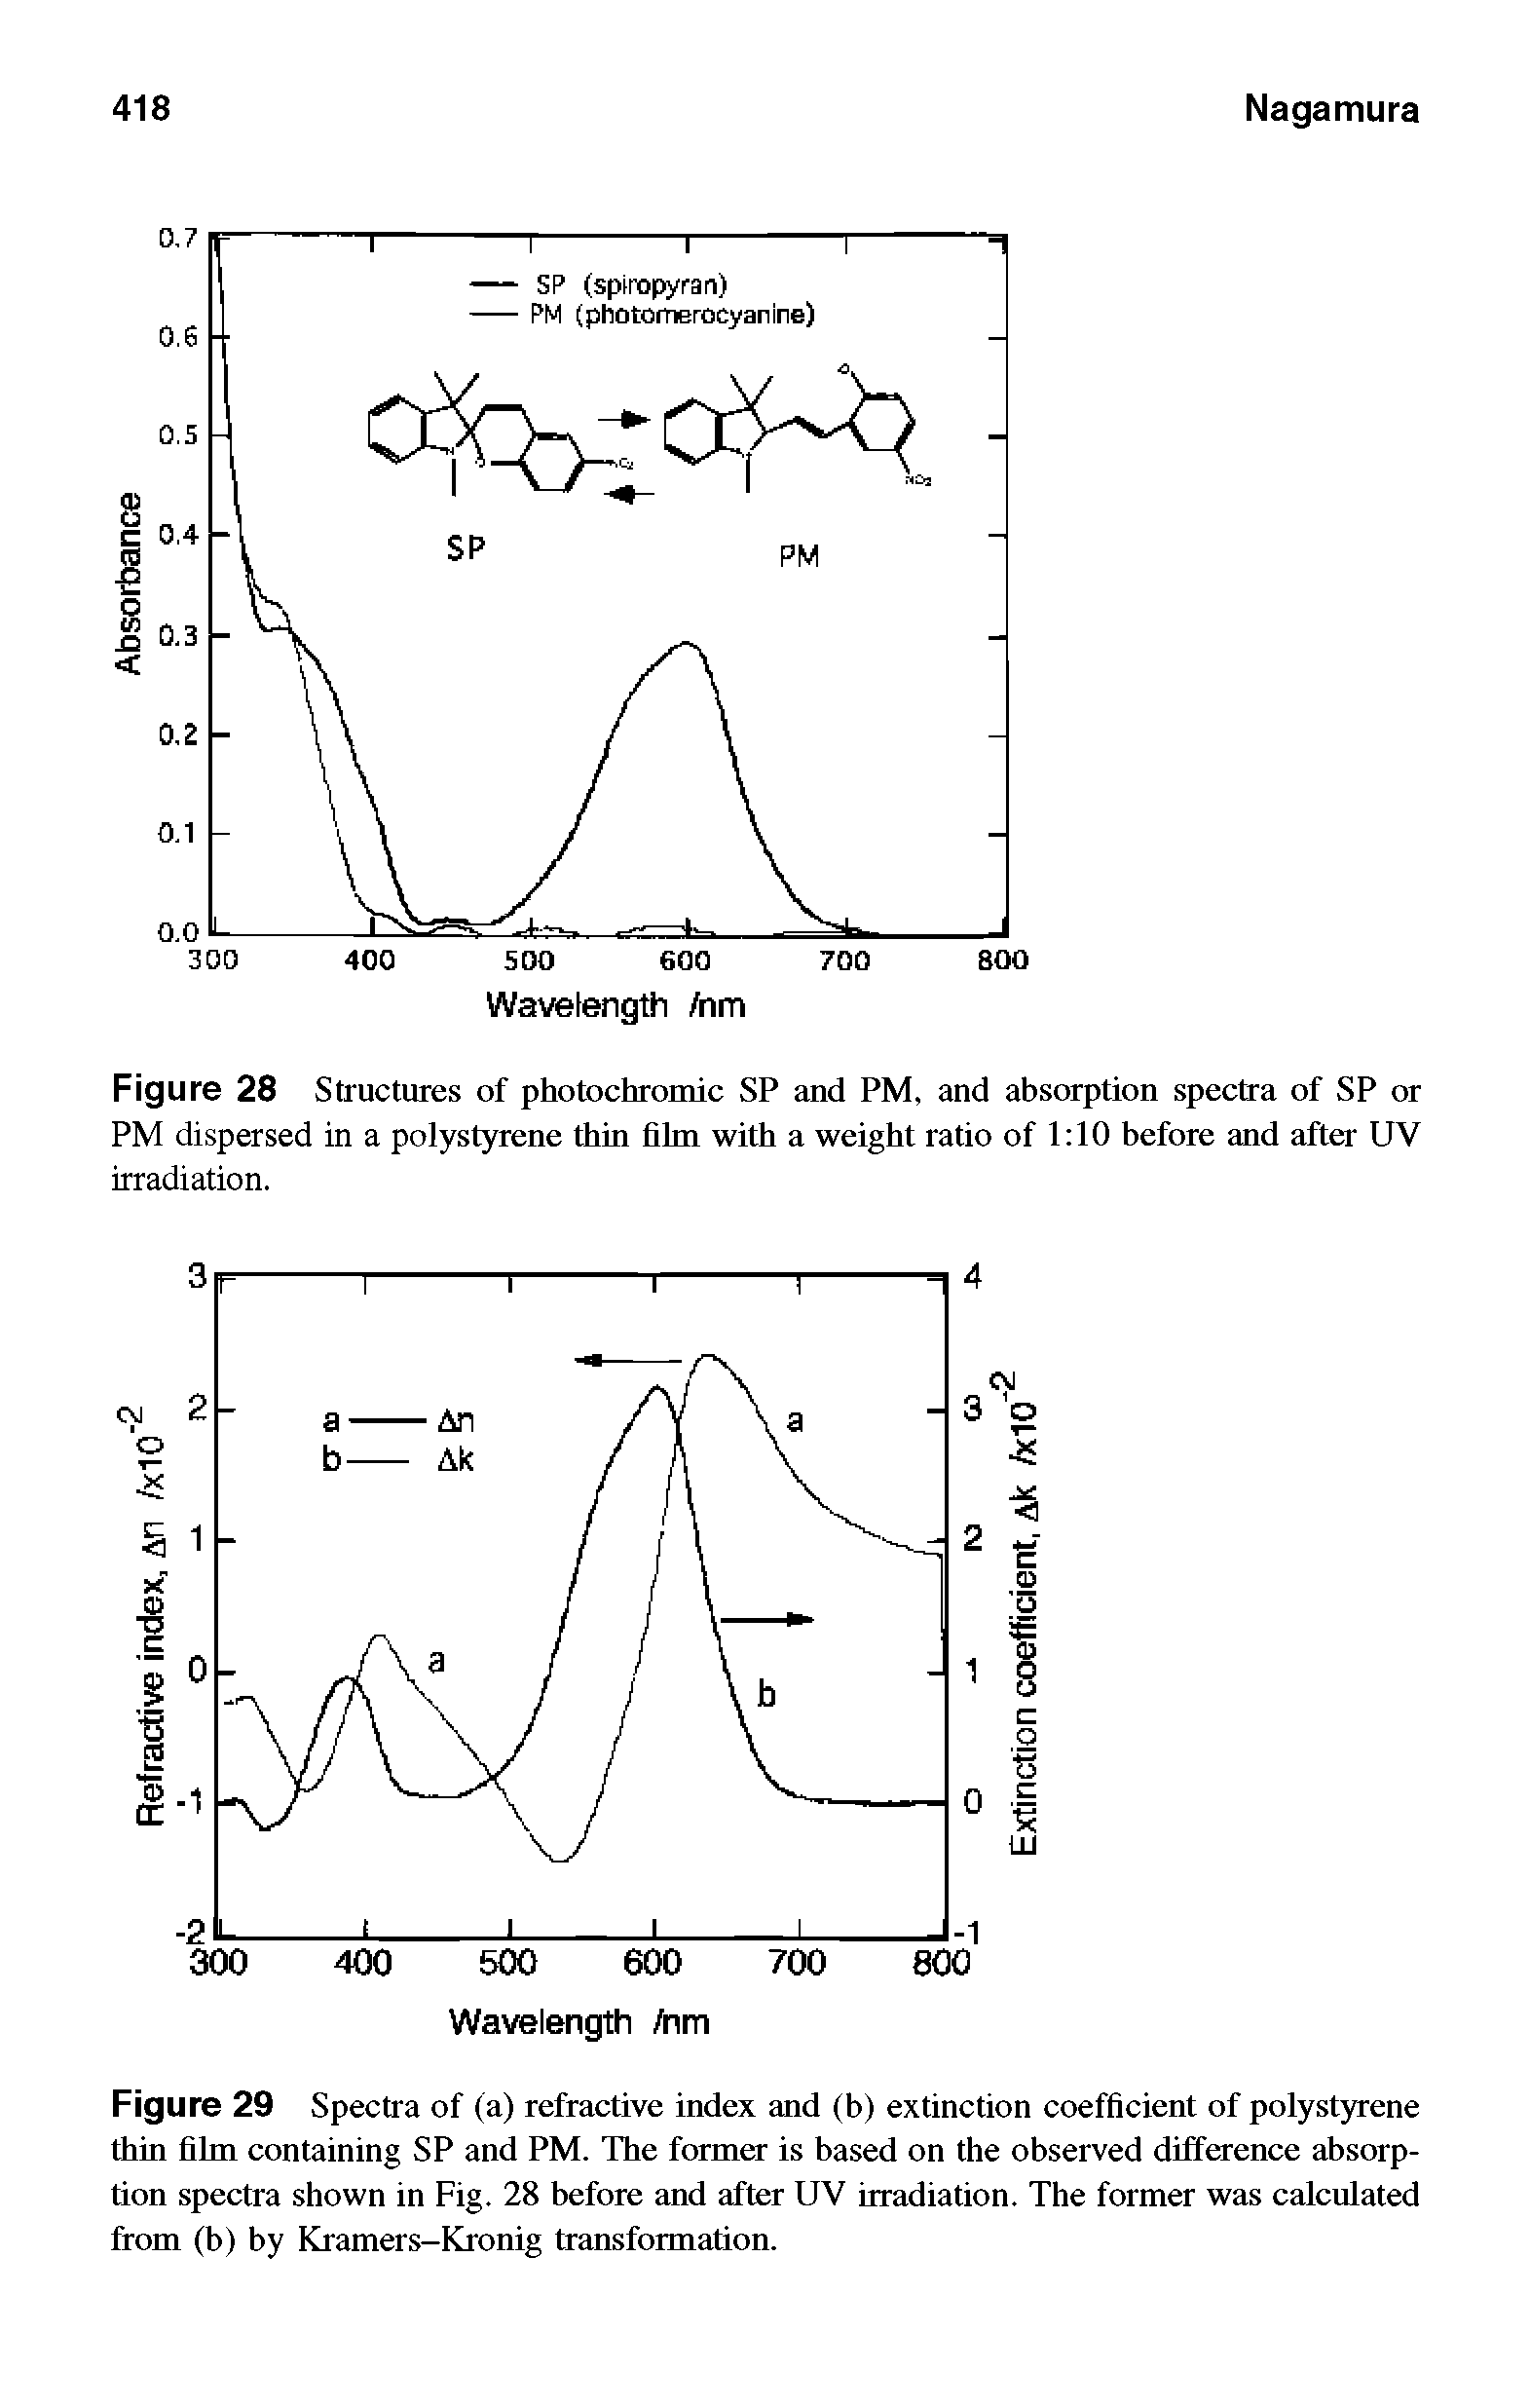 Figure 29 Spectra of (a) refractive index and (b) extinction coefficient of polystyrene thin film containing SP and PM. The former is based on the observed difference absorption spectra shown in Fig. 28 before and after UV irradiation. The former was calculated from (b) by Kramers-Kronig transformation.